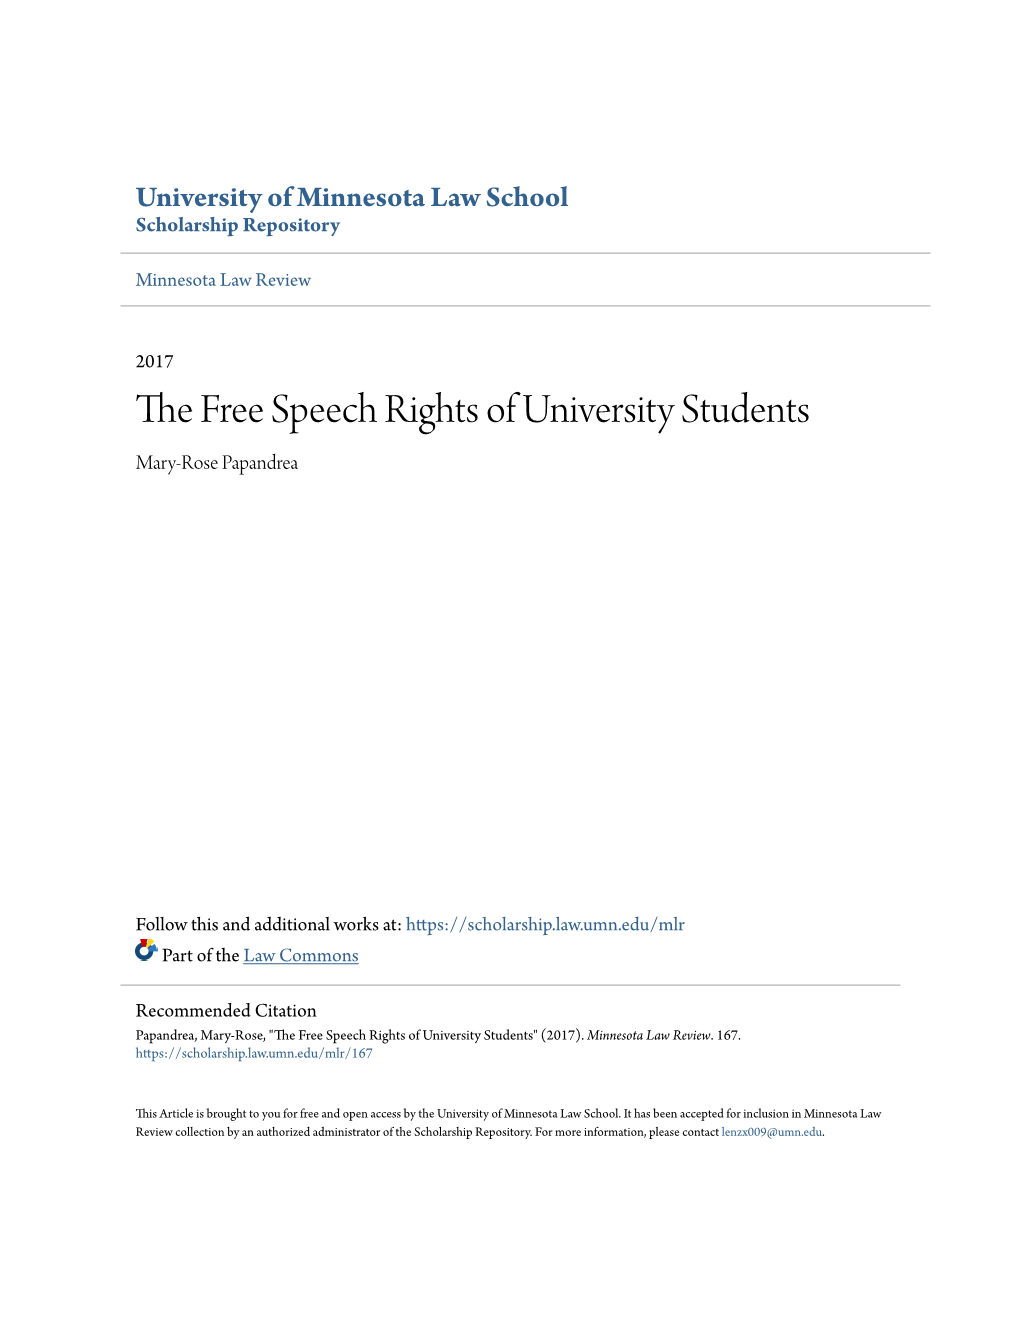 The Free Speech Rights of University Students